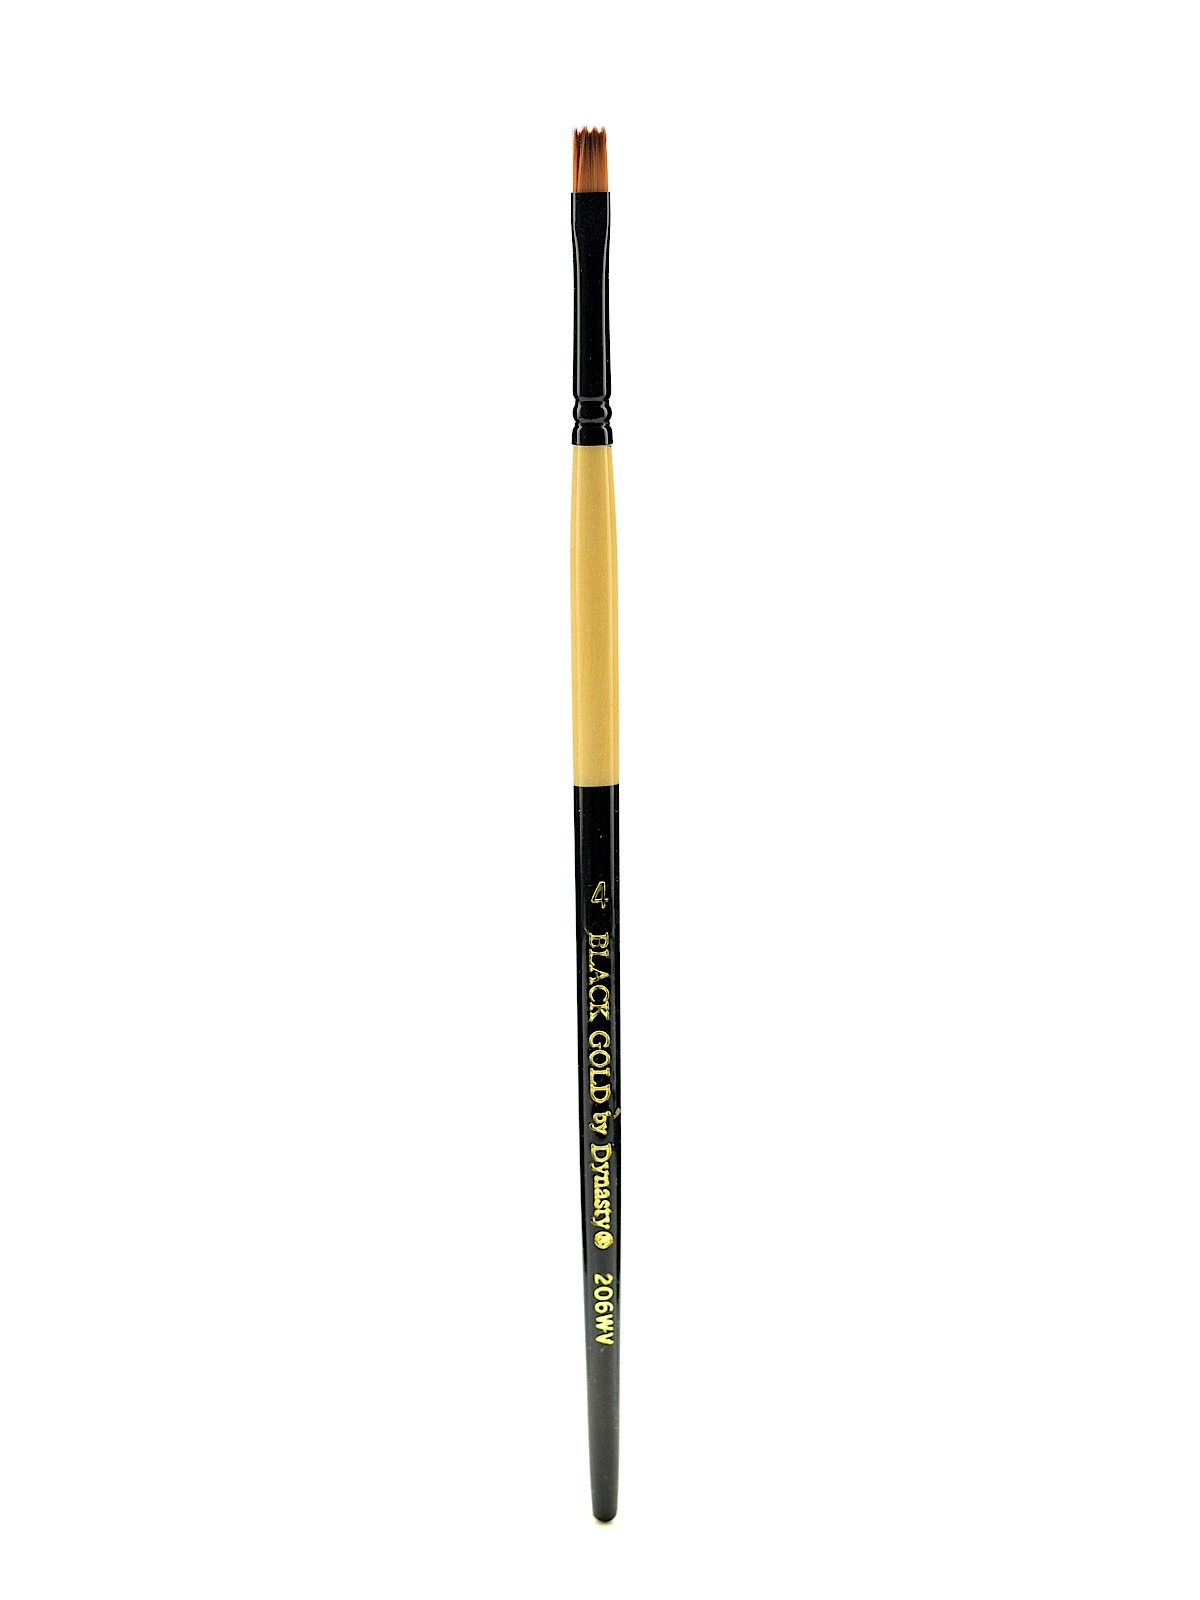 Black Gold Series Synthetic Brushes Short Handle 4 Wave